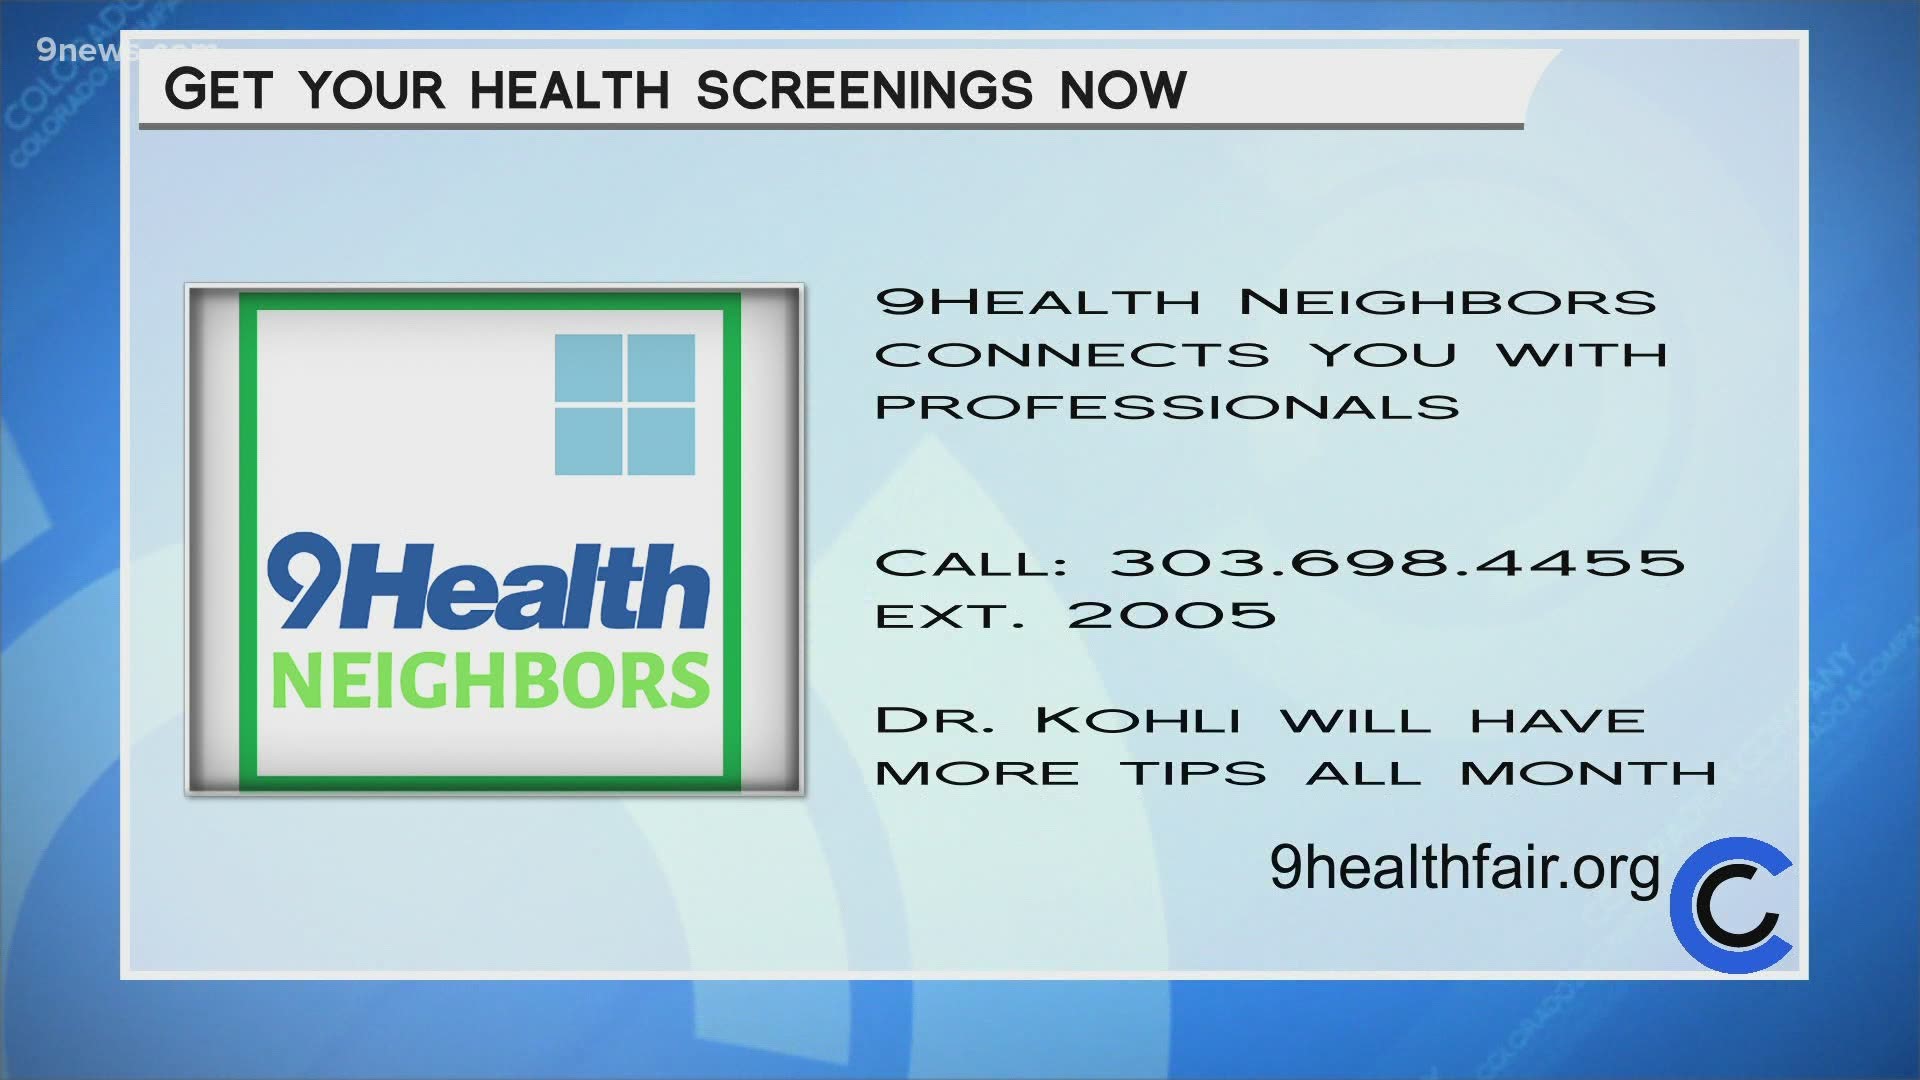 Go to 9HealthFair.org to sign up for a screening today. 9Health Neighbors can still answer questions! Call them at 303.698.4455, ext. 2005.